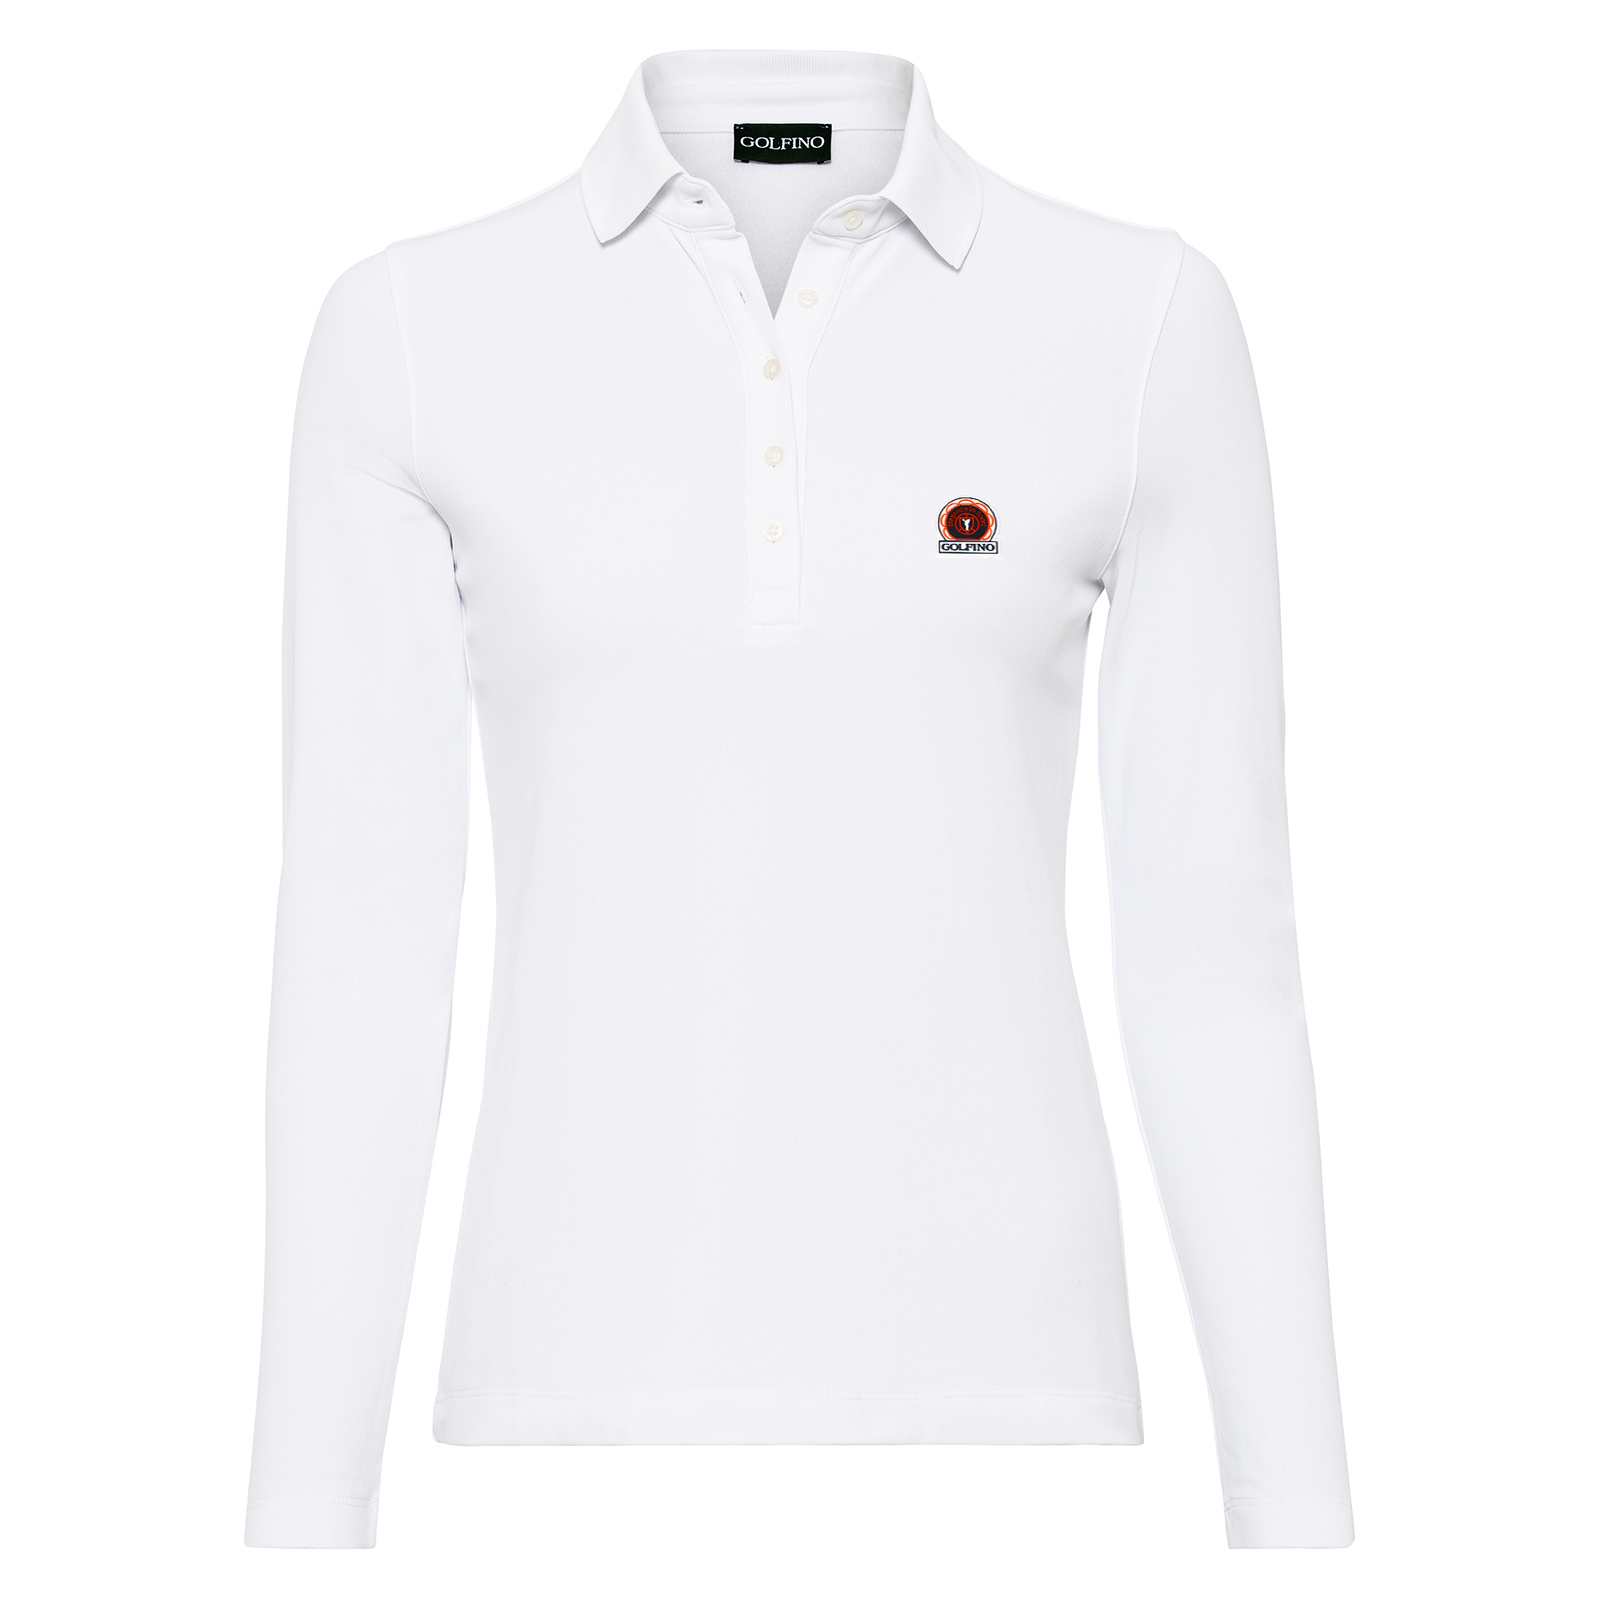 Ladies’ moisture-wicking long-sleeved polo shirt with signature logo